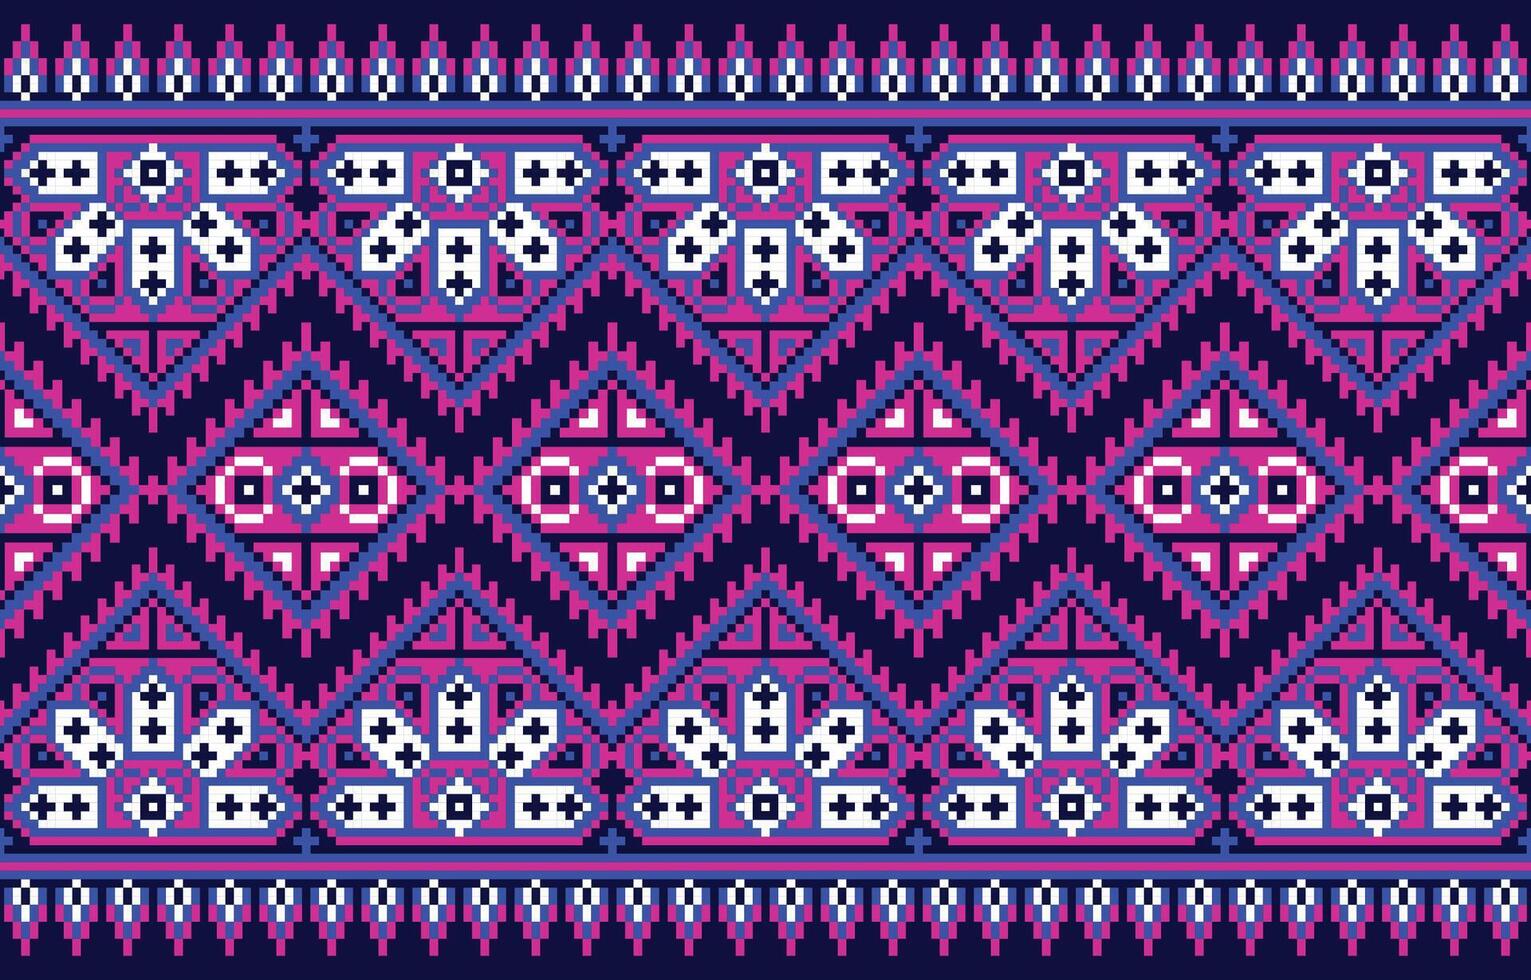 Cross Stitch ethnic fabric patterns.  Pixel pattern . Abstract,vector,illustration.Design for  Saree,Patola,Sari,Dupatta,Pixel,Ikat,texture,clothing,wrapping,decoration,carpet. vector